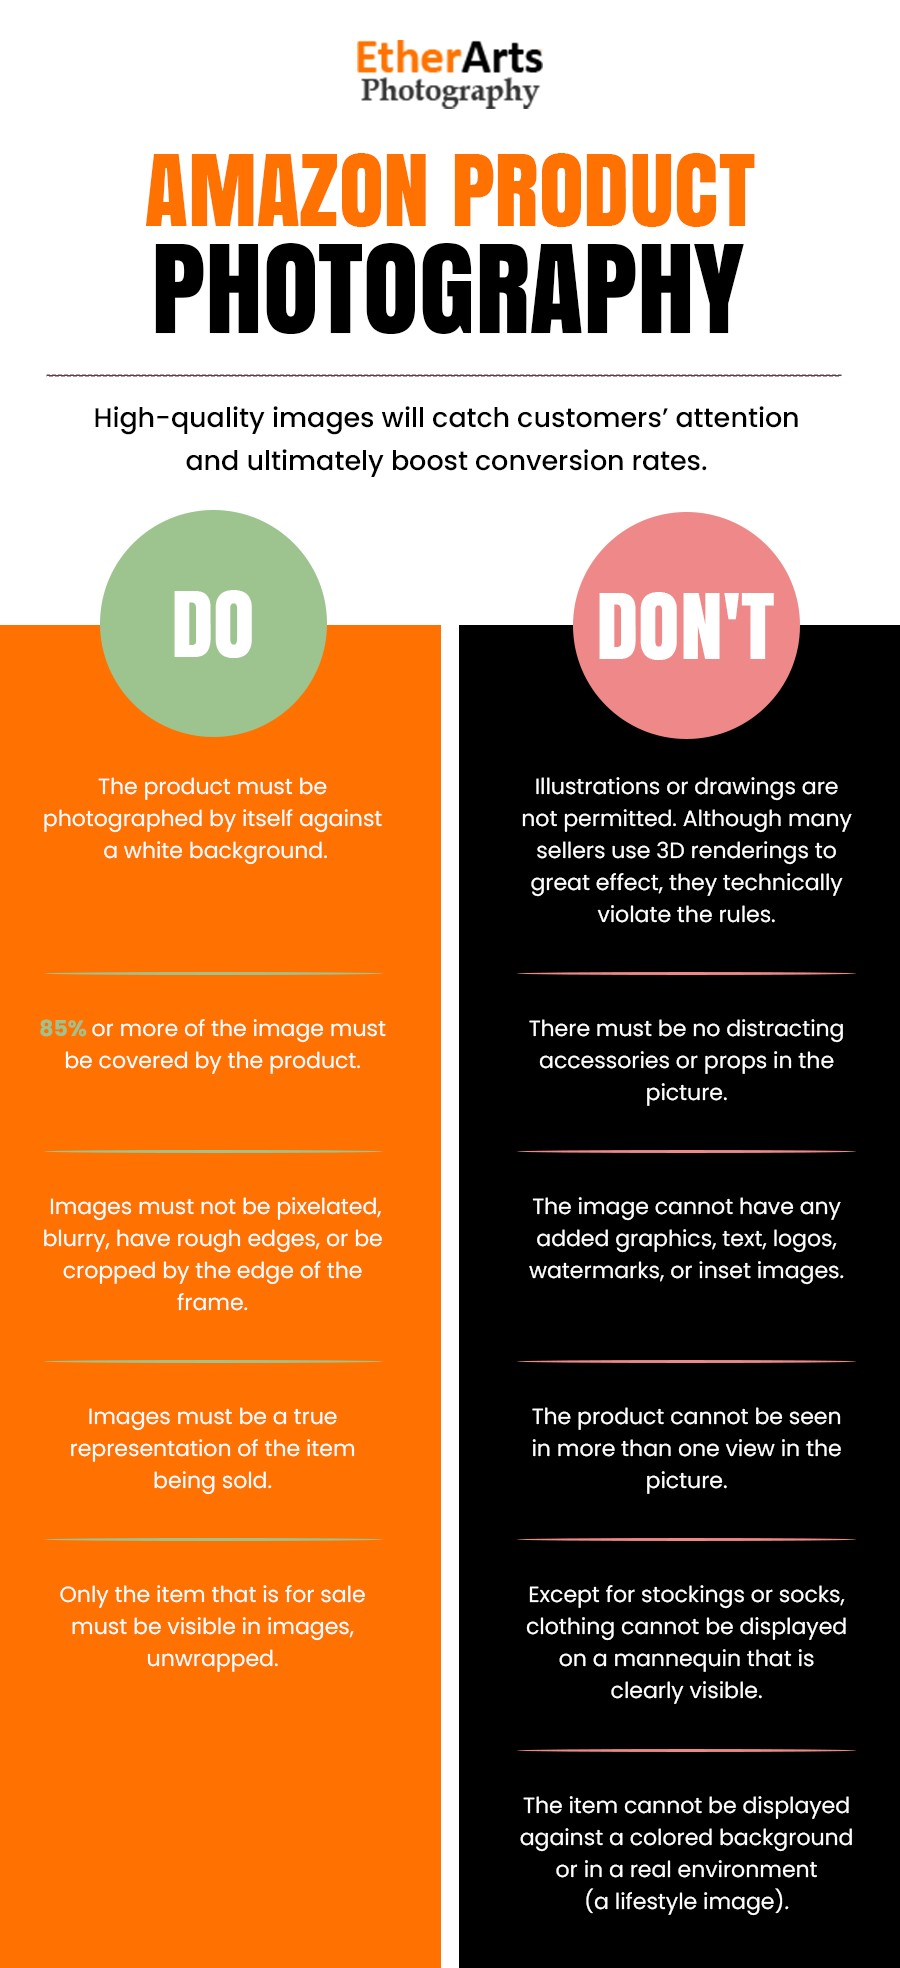 Amazon Photography Do's and Don't